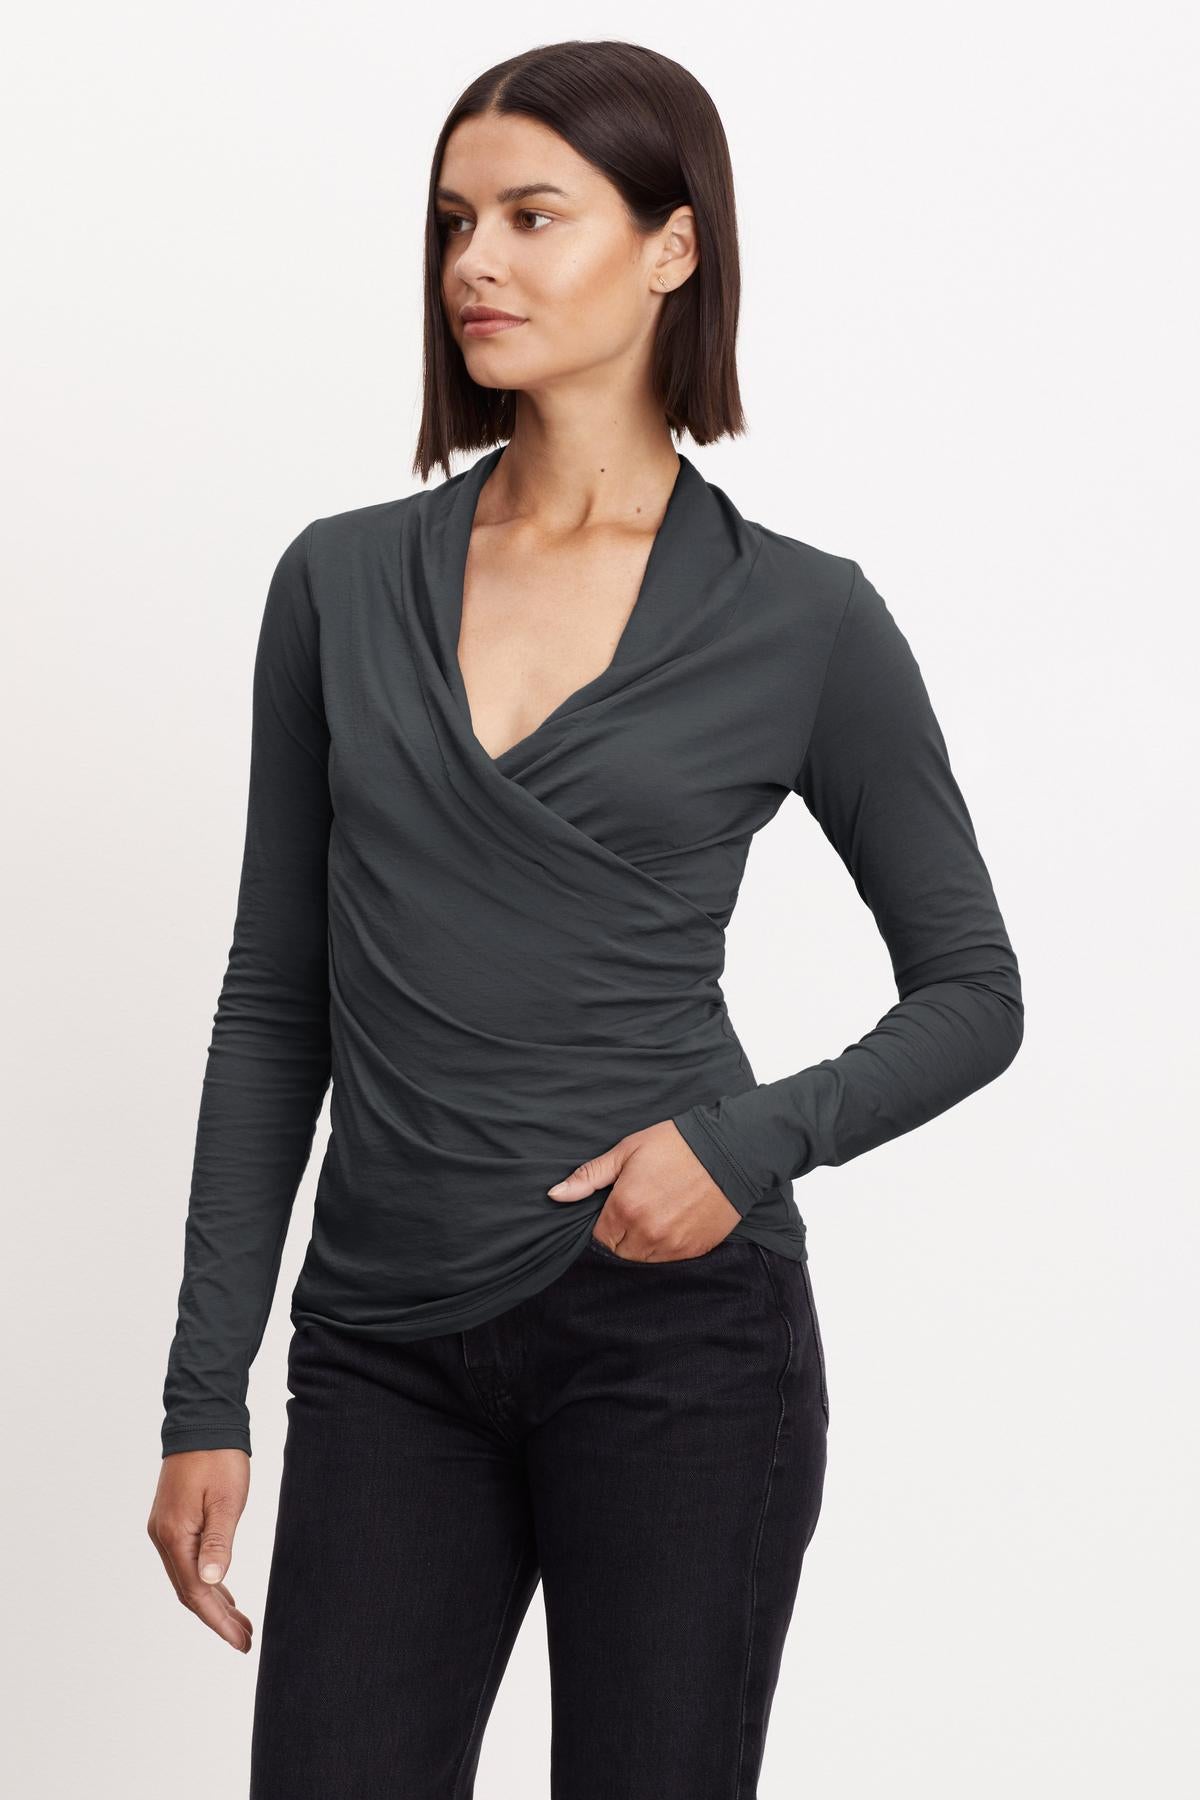 A woman wearing a Velvet by Graham & Spencer MERI WRAP FRONT FITTED TOP, a grey long-sleeved top with a slight crossover v-neck.-35783009894593